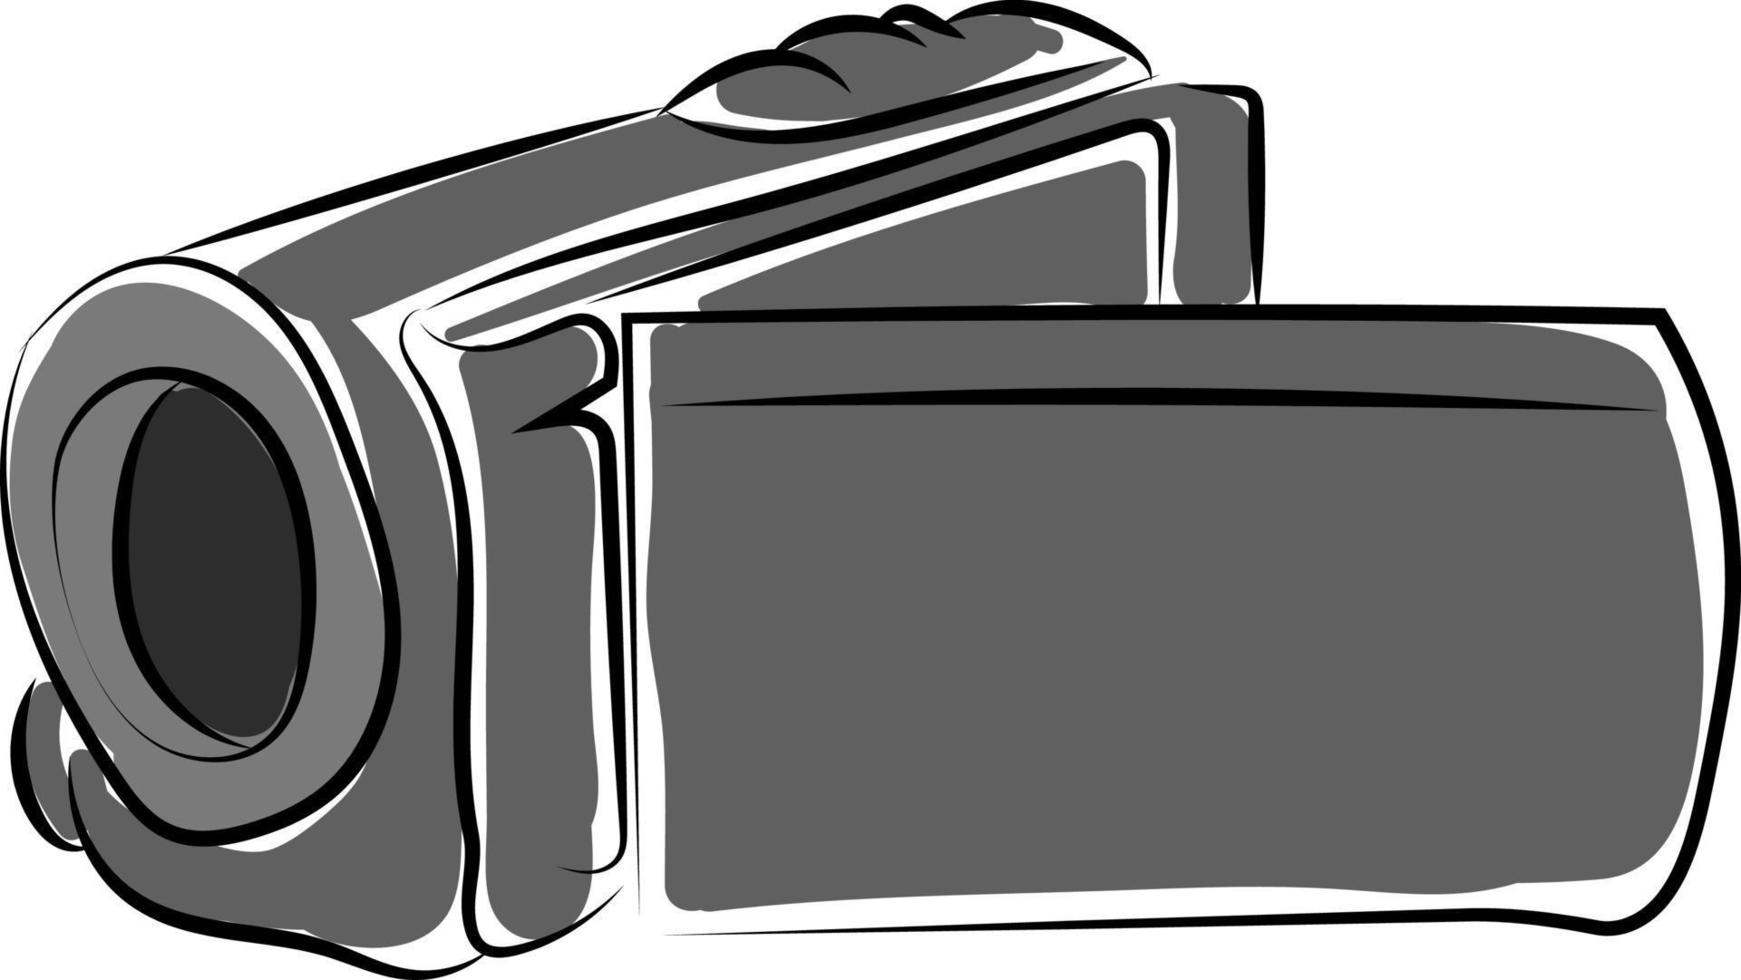 Video camera drawing, illustration, vector on white background.